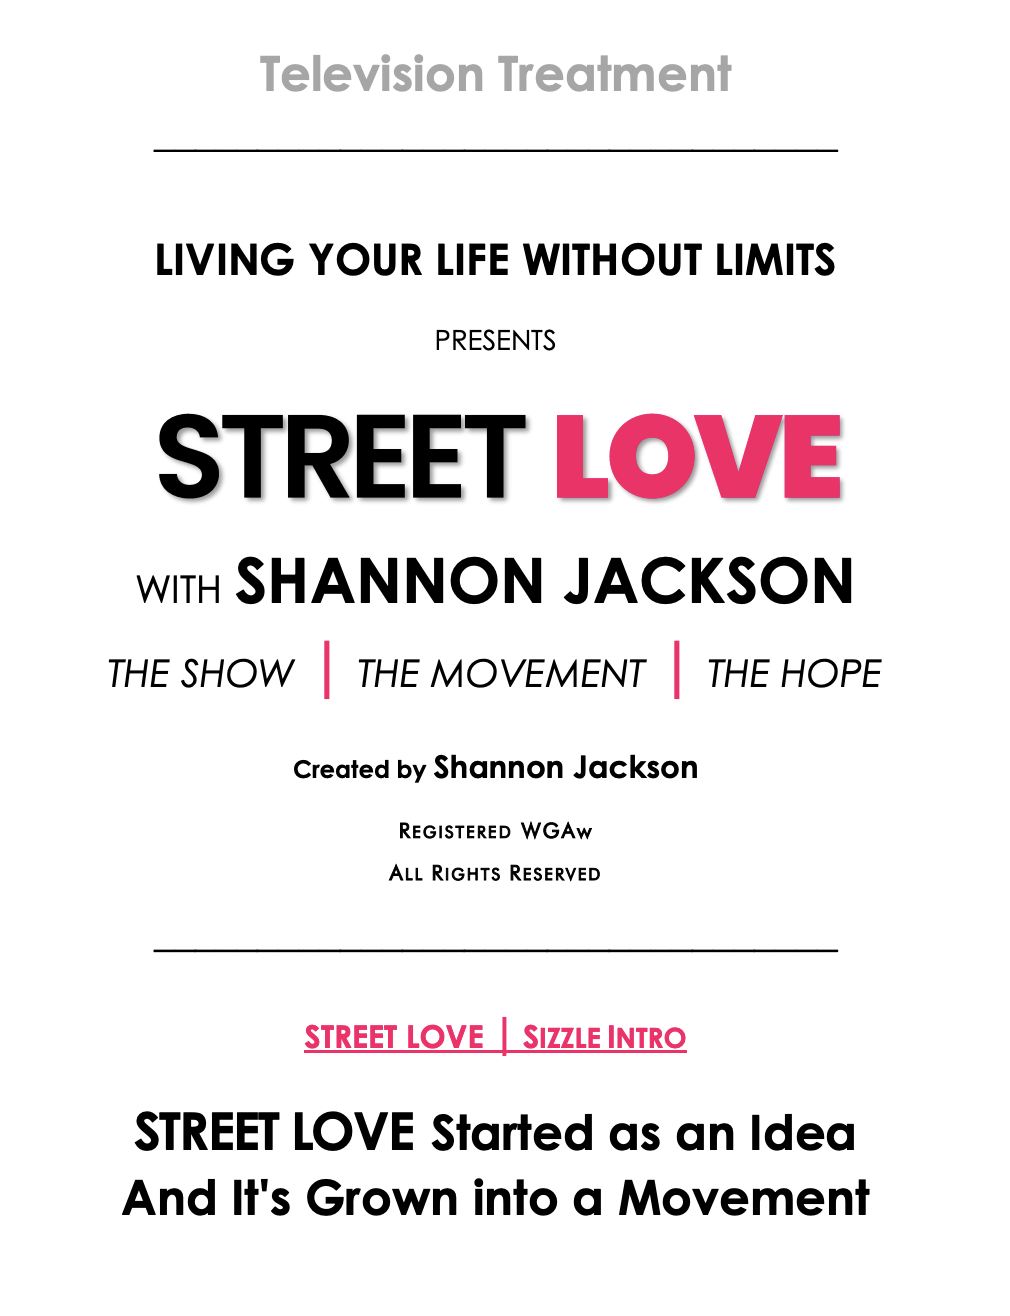 Indiegogo Campaign Launched For The Upcoming Street Love Web Series - Season 2